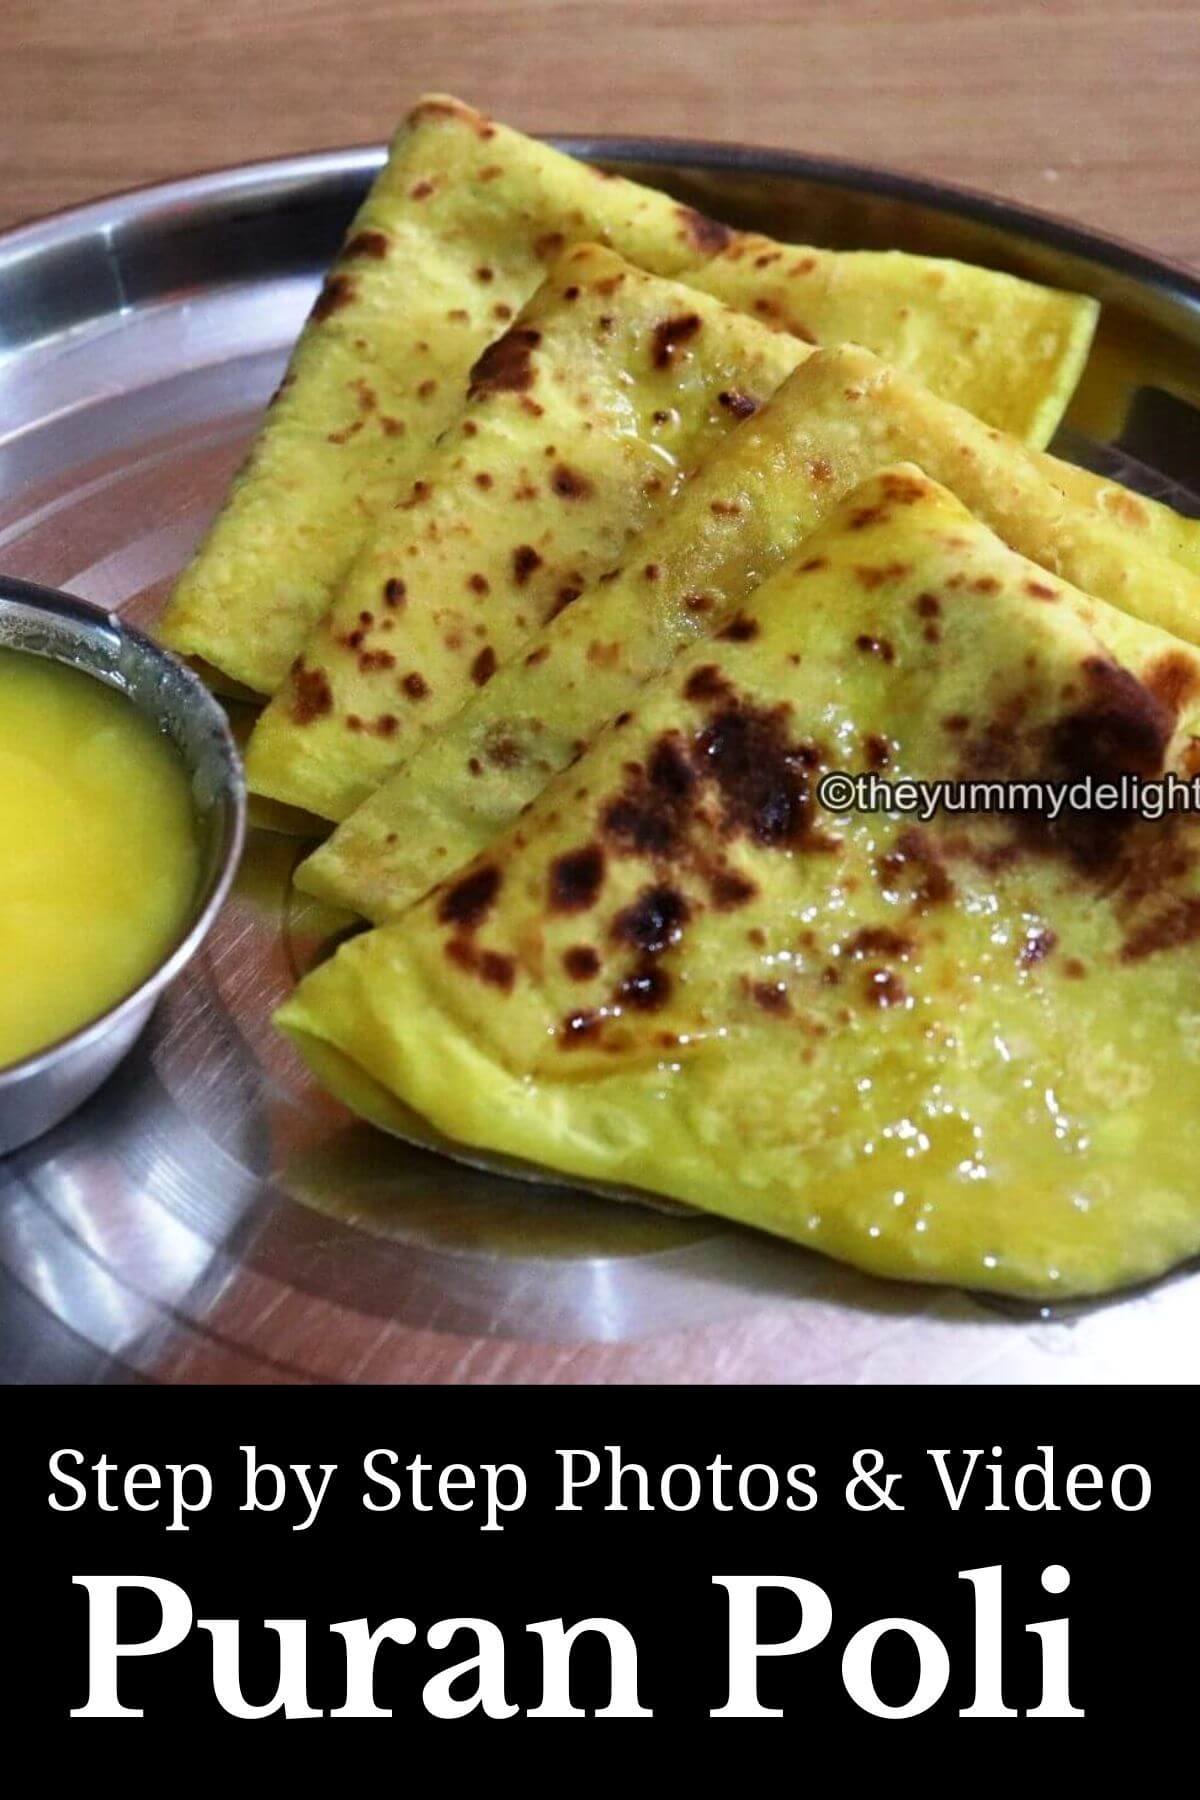 Image of 4 puran poli on a plate. It is served with a bowl of ghee.